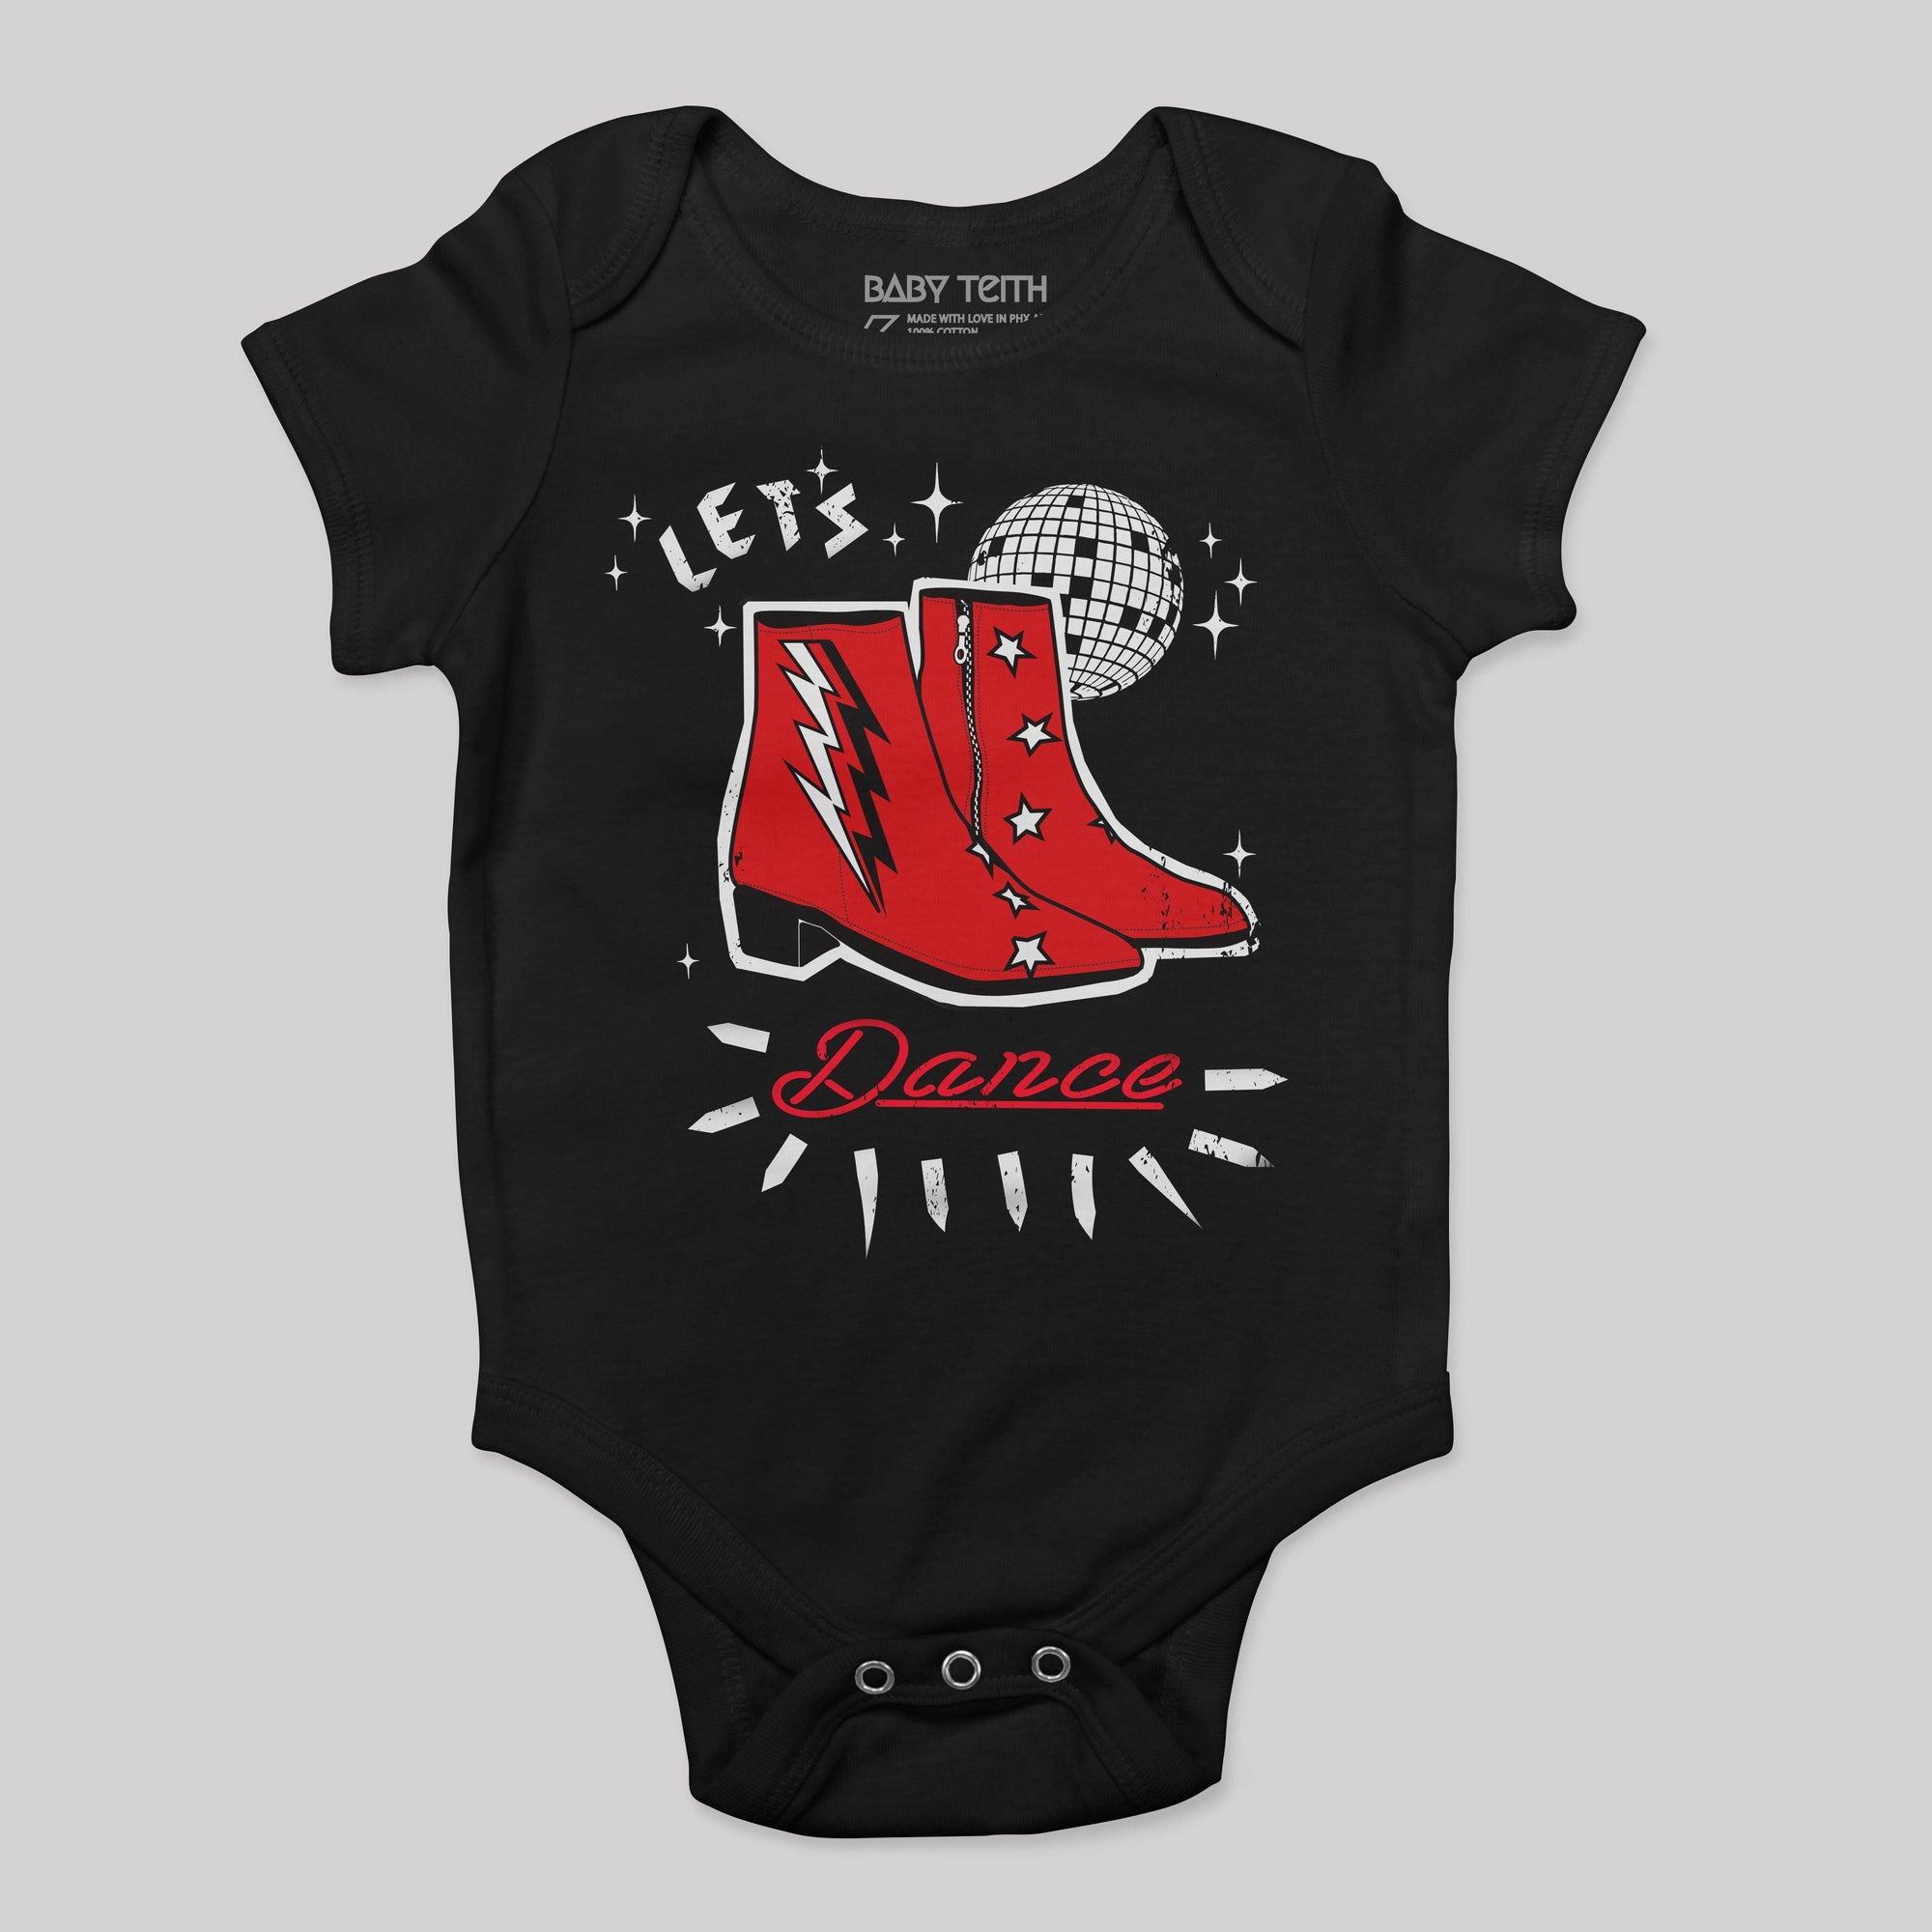 "Let's Dance" Bodysuit for Baby - Baby Teith